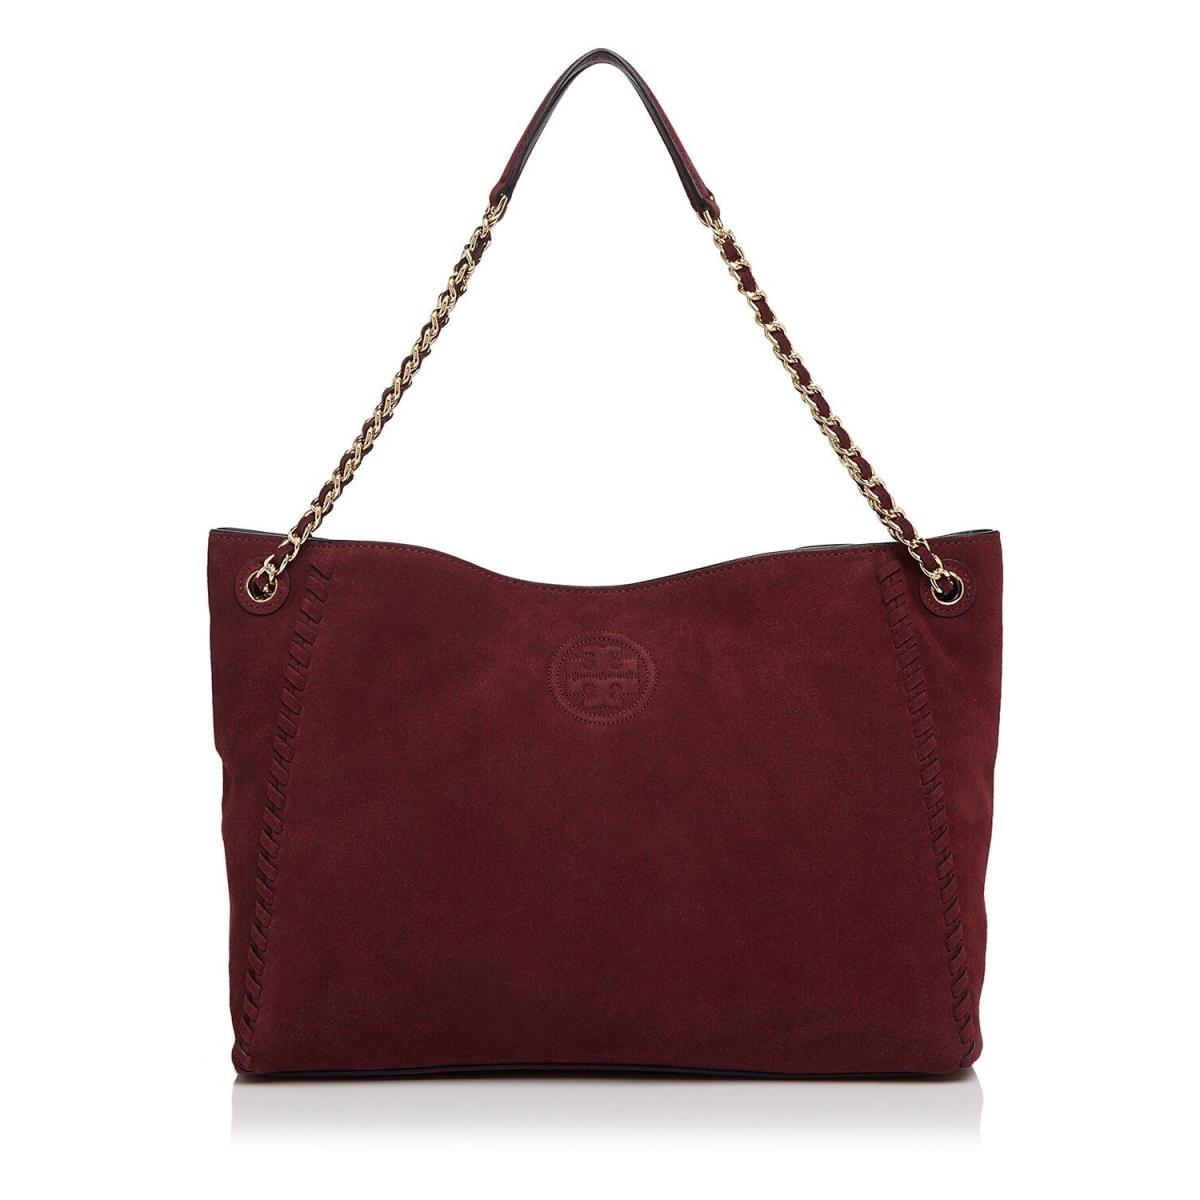 Tory Burch Marion Slouchy Suede Chain Tote Bag Port Handbag Red